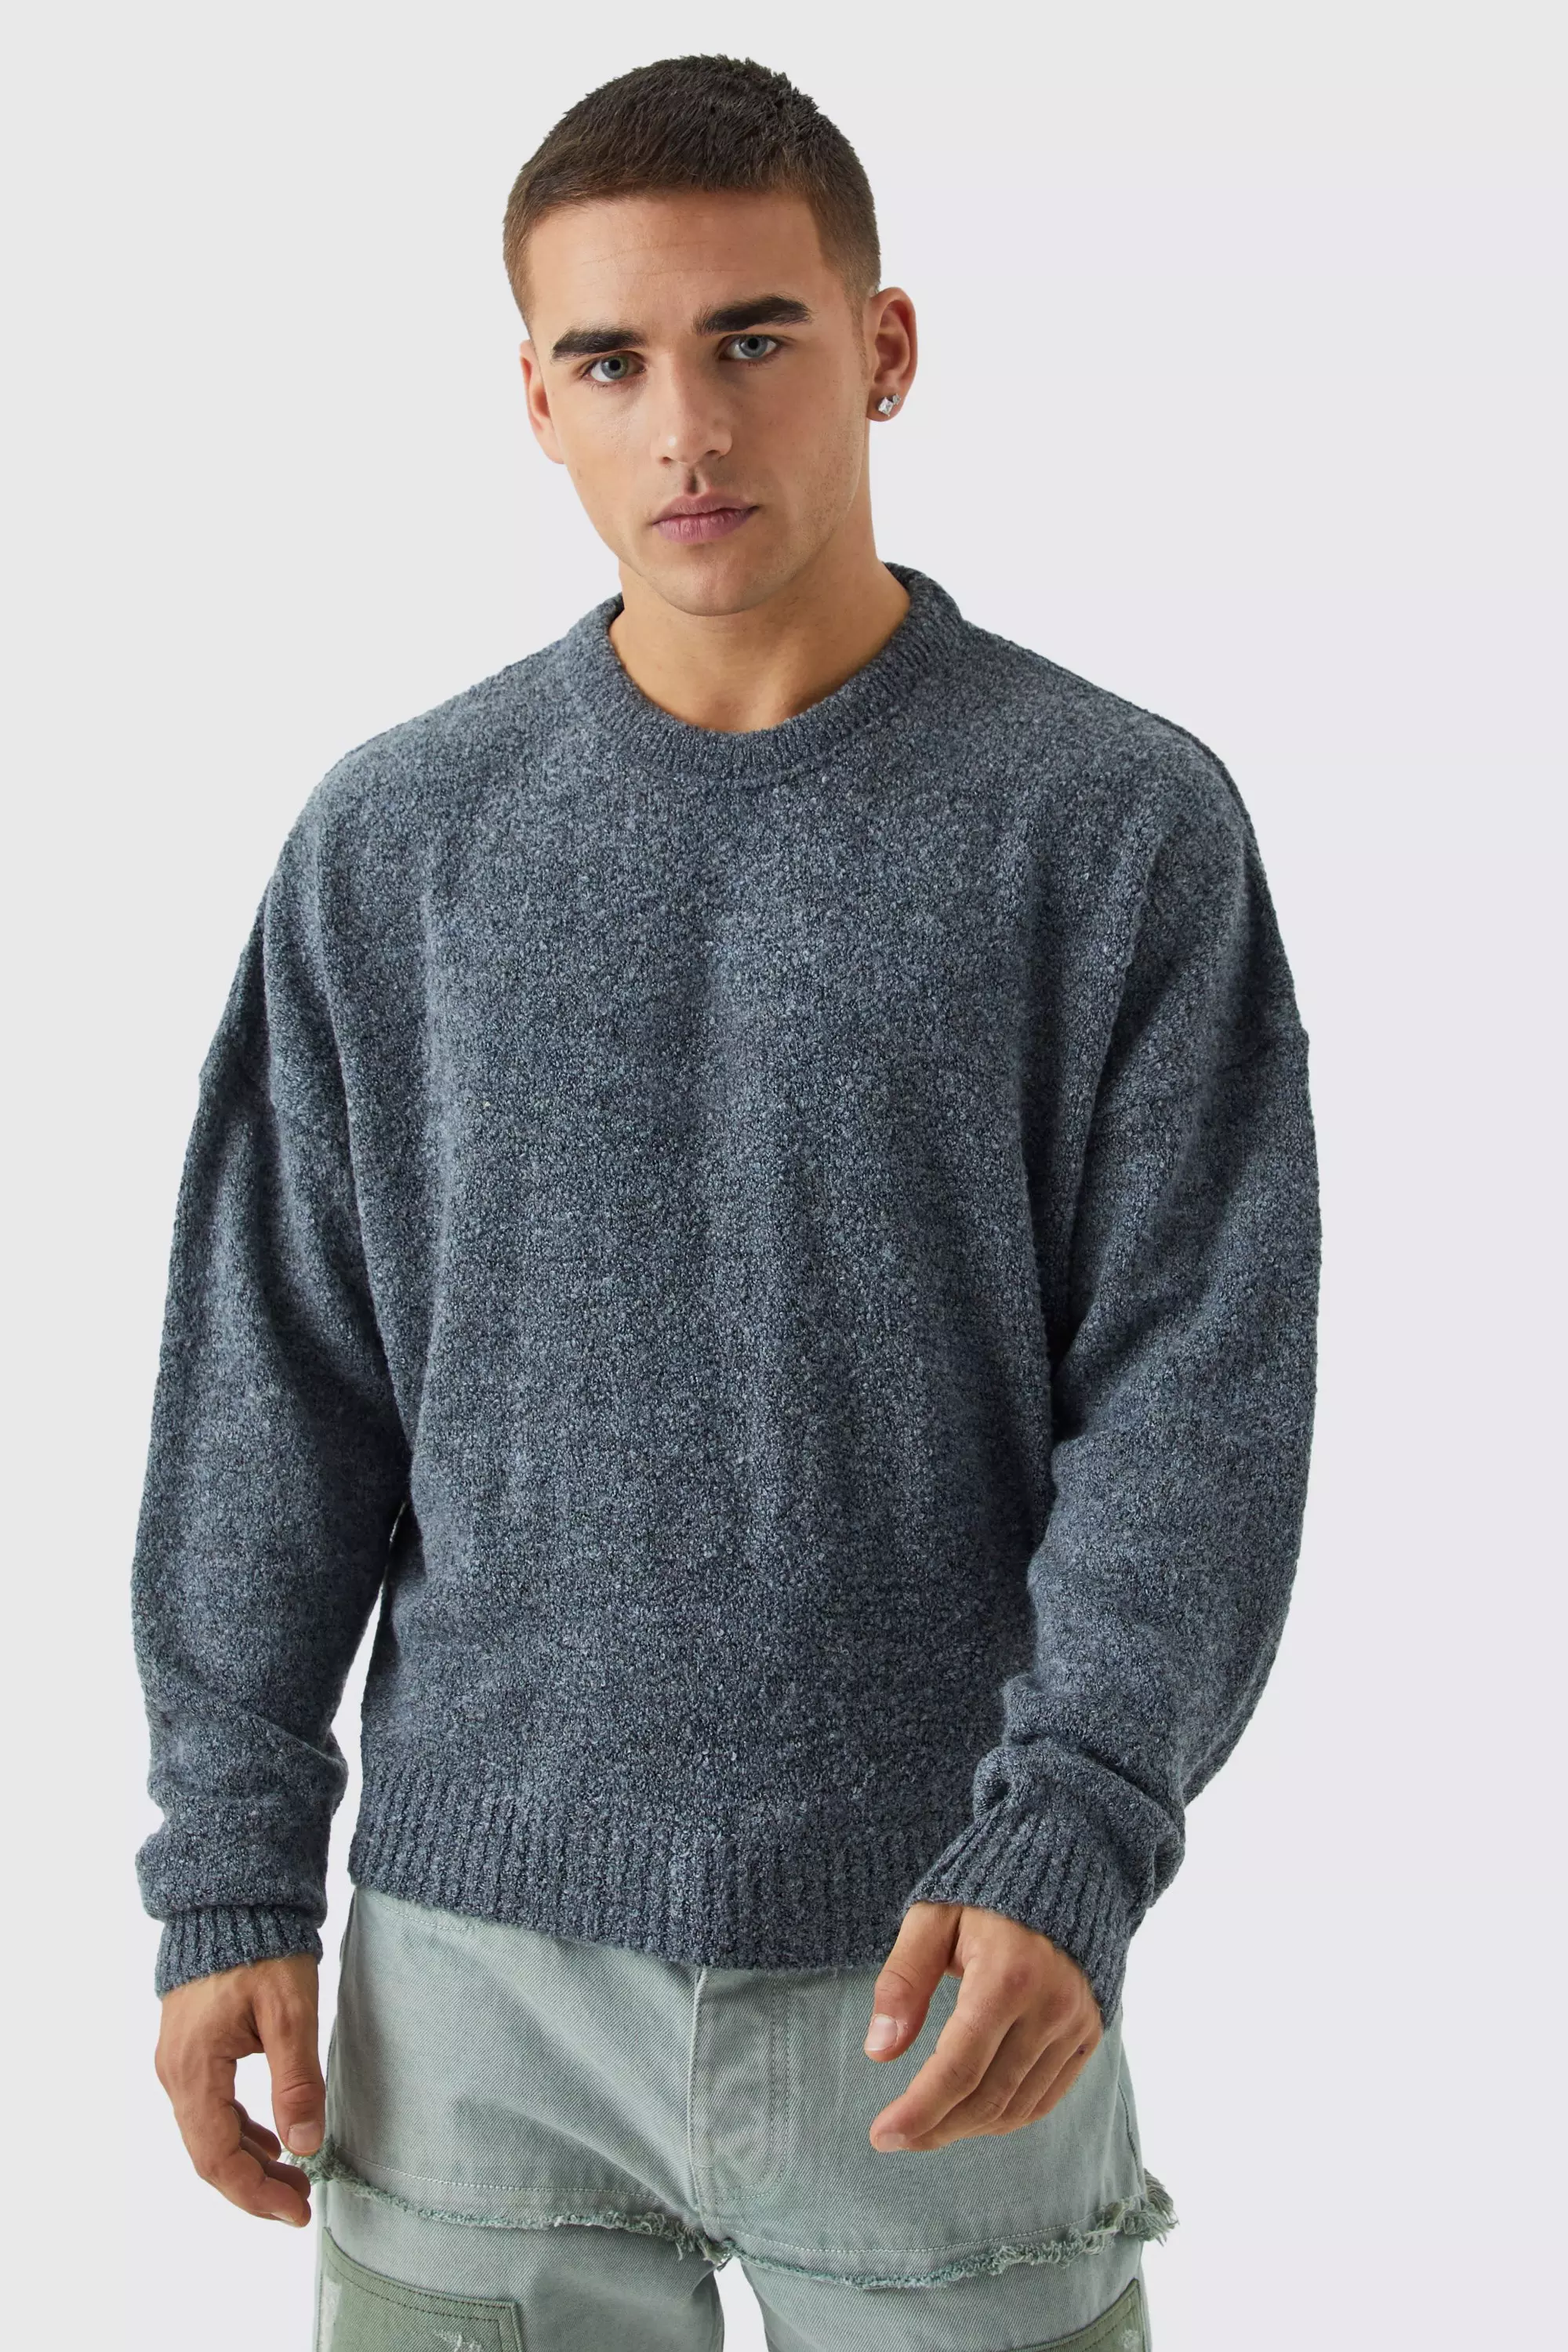 Charcoal Grey Boxy Boucle Knit Extended Neck Sweater